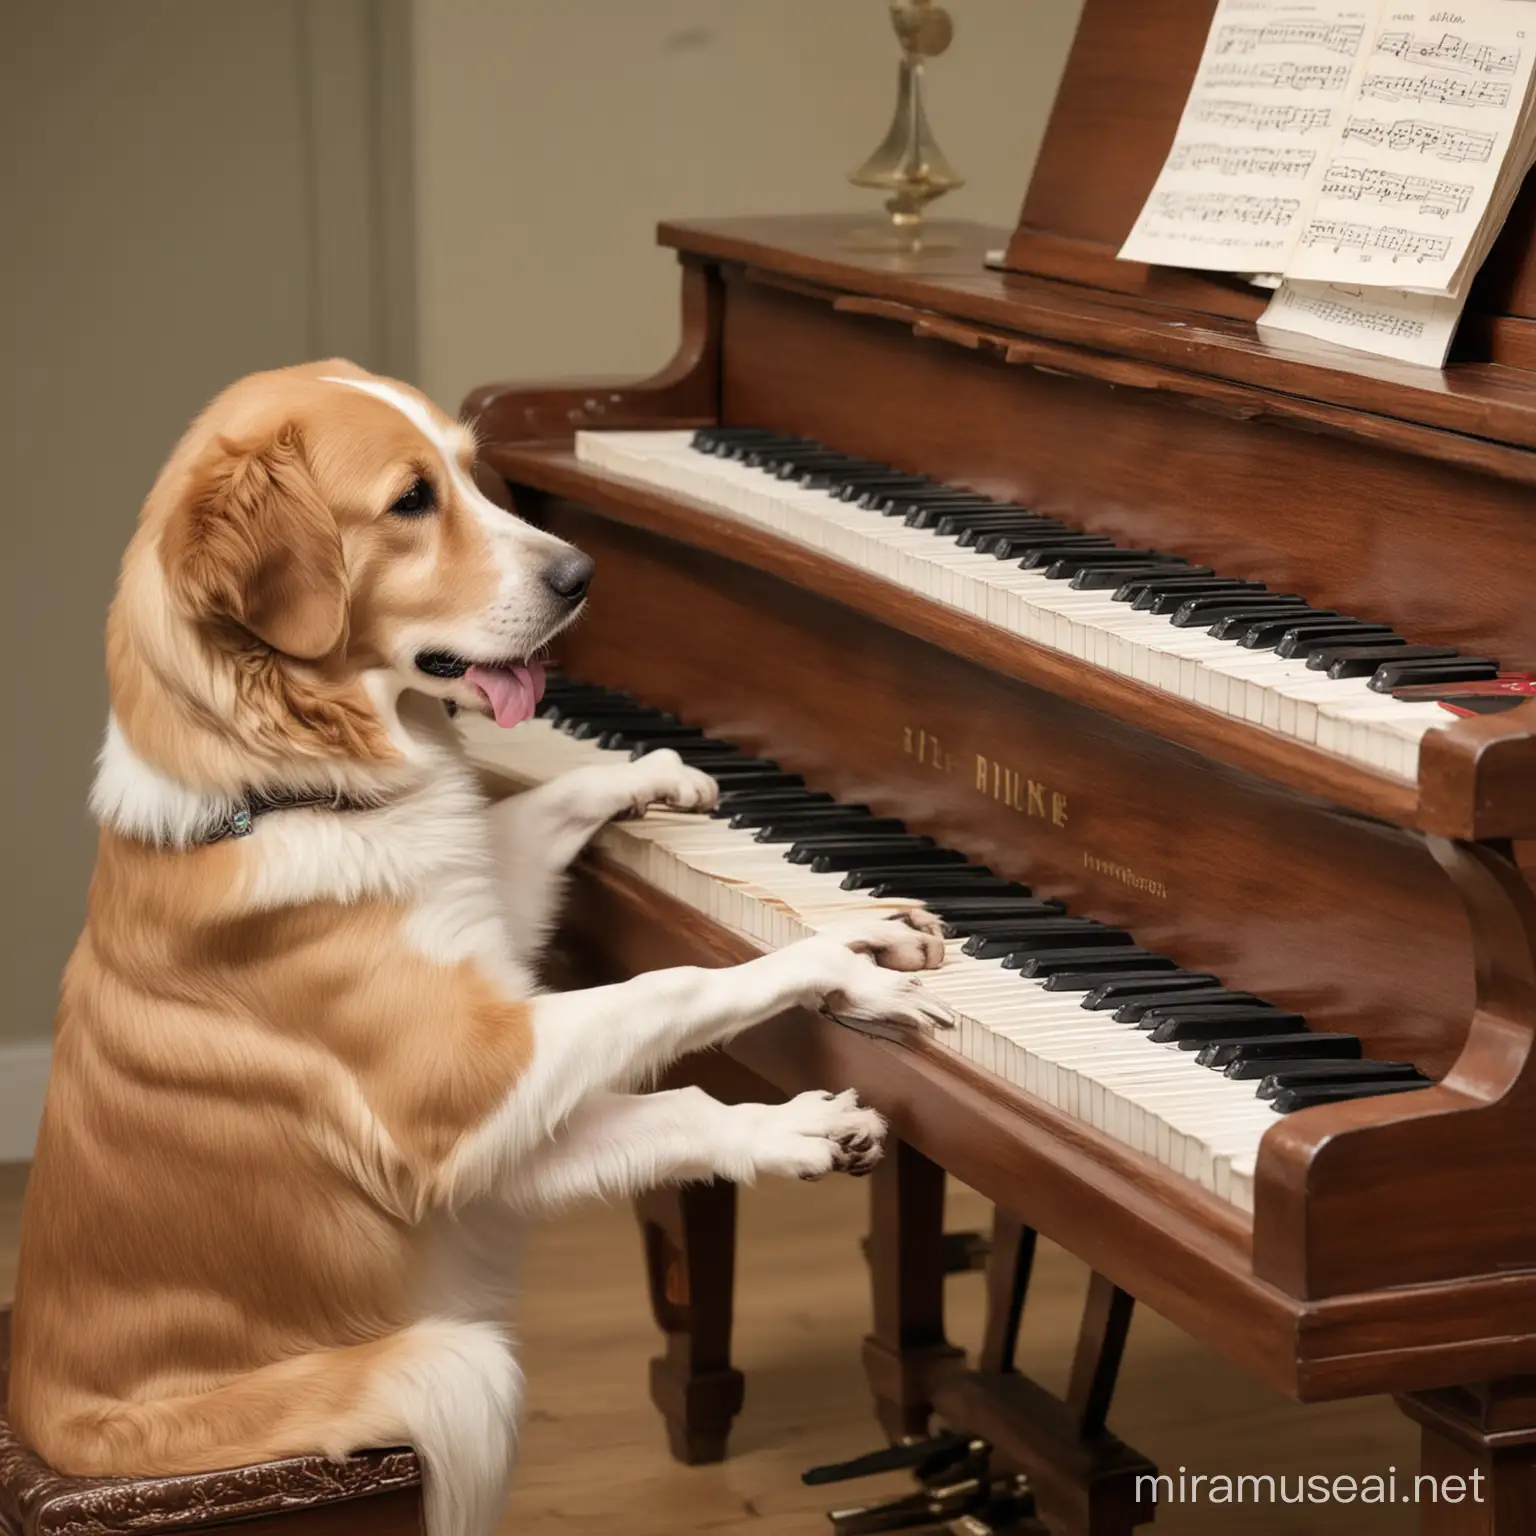 Talented Canine Pianist Performing a Musical Masterpiece